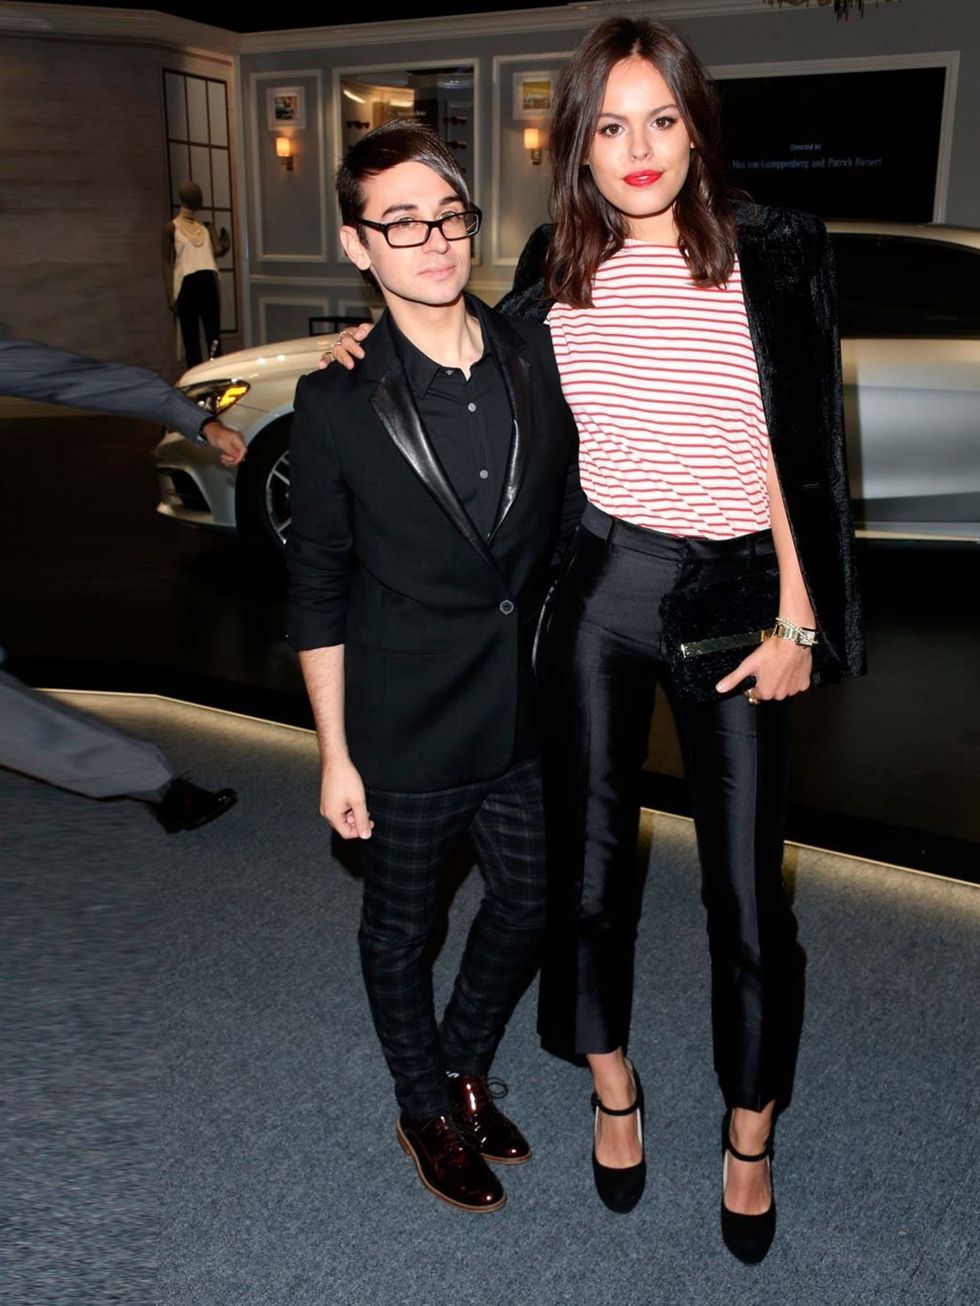 <p>Christian Siriano and Atlanta de Cadenet attend the 2013 Style Awards at Lincoln Center on 4 September 2013.</p>